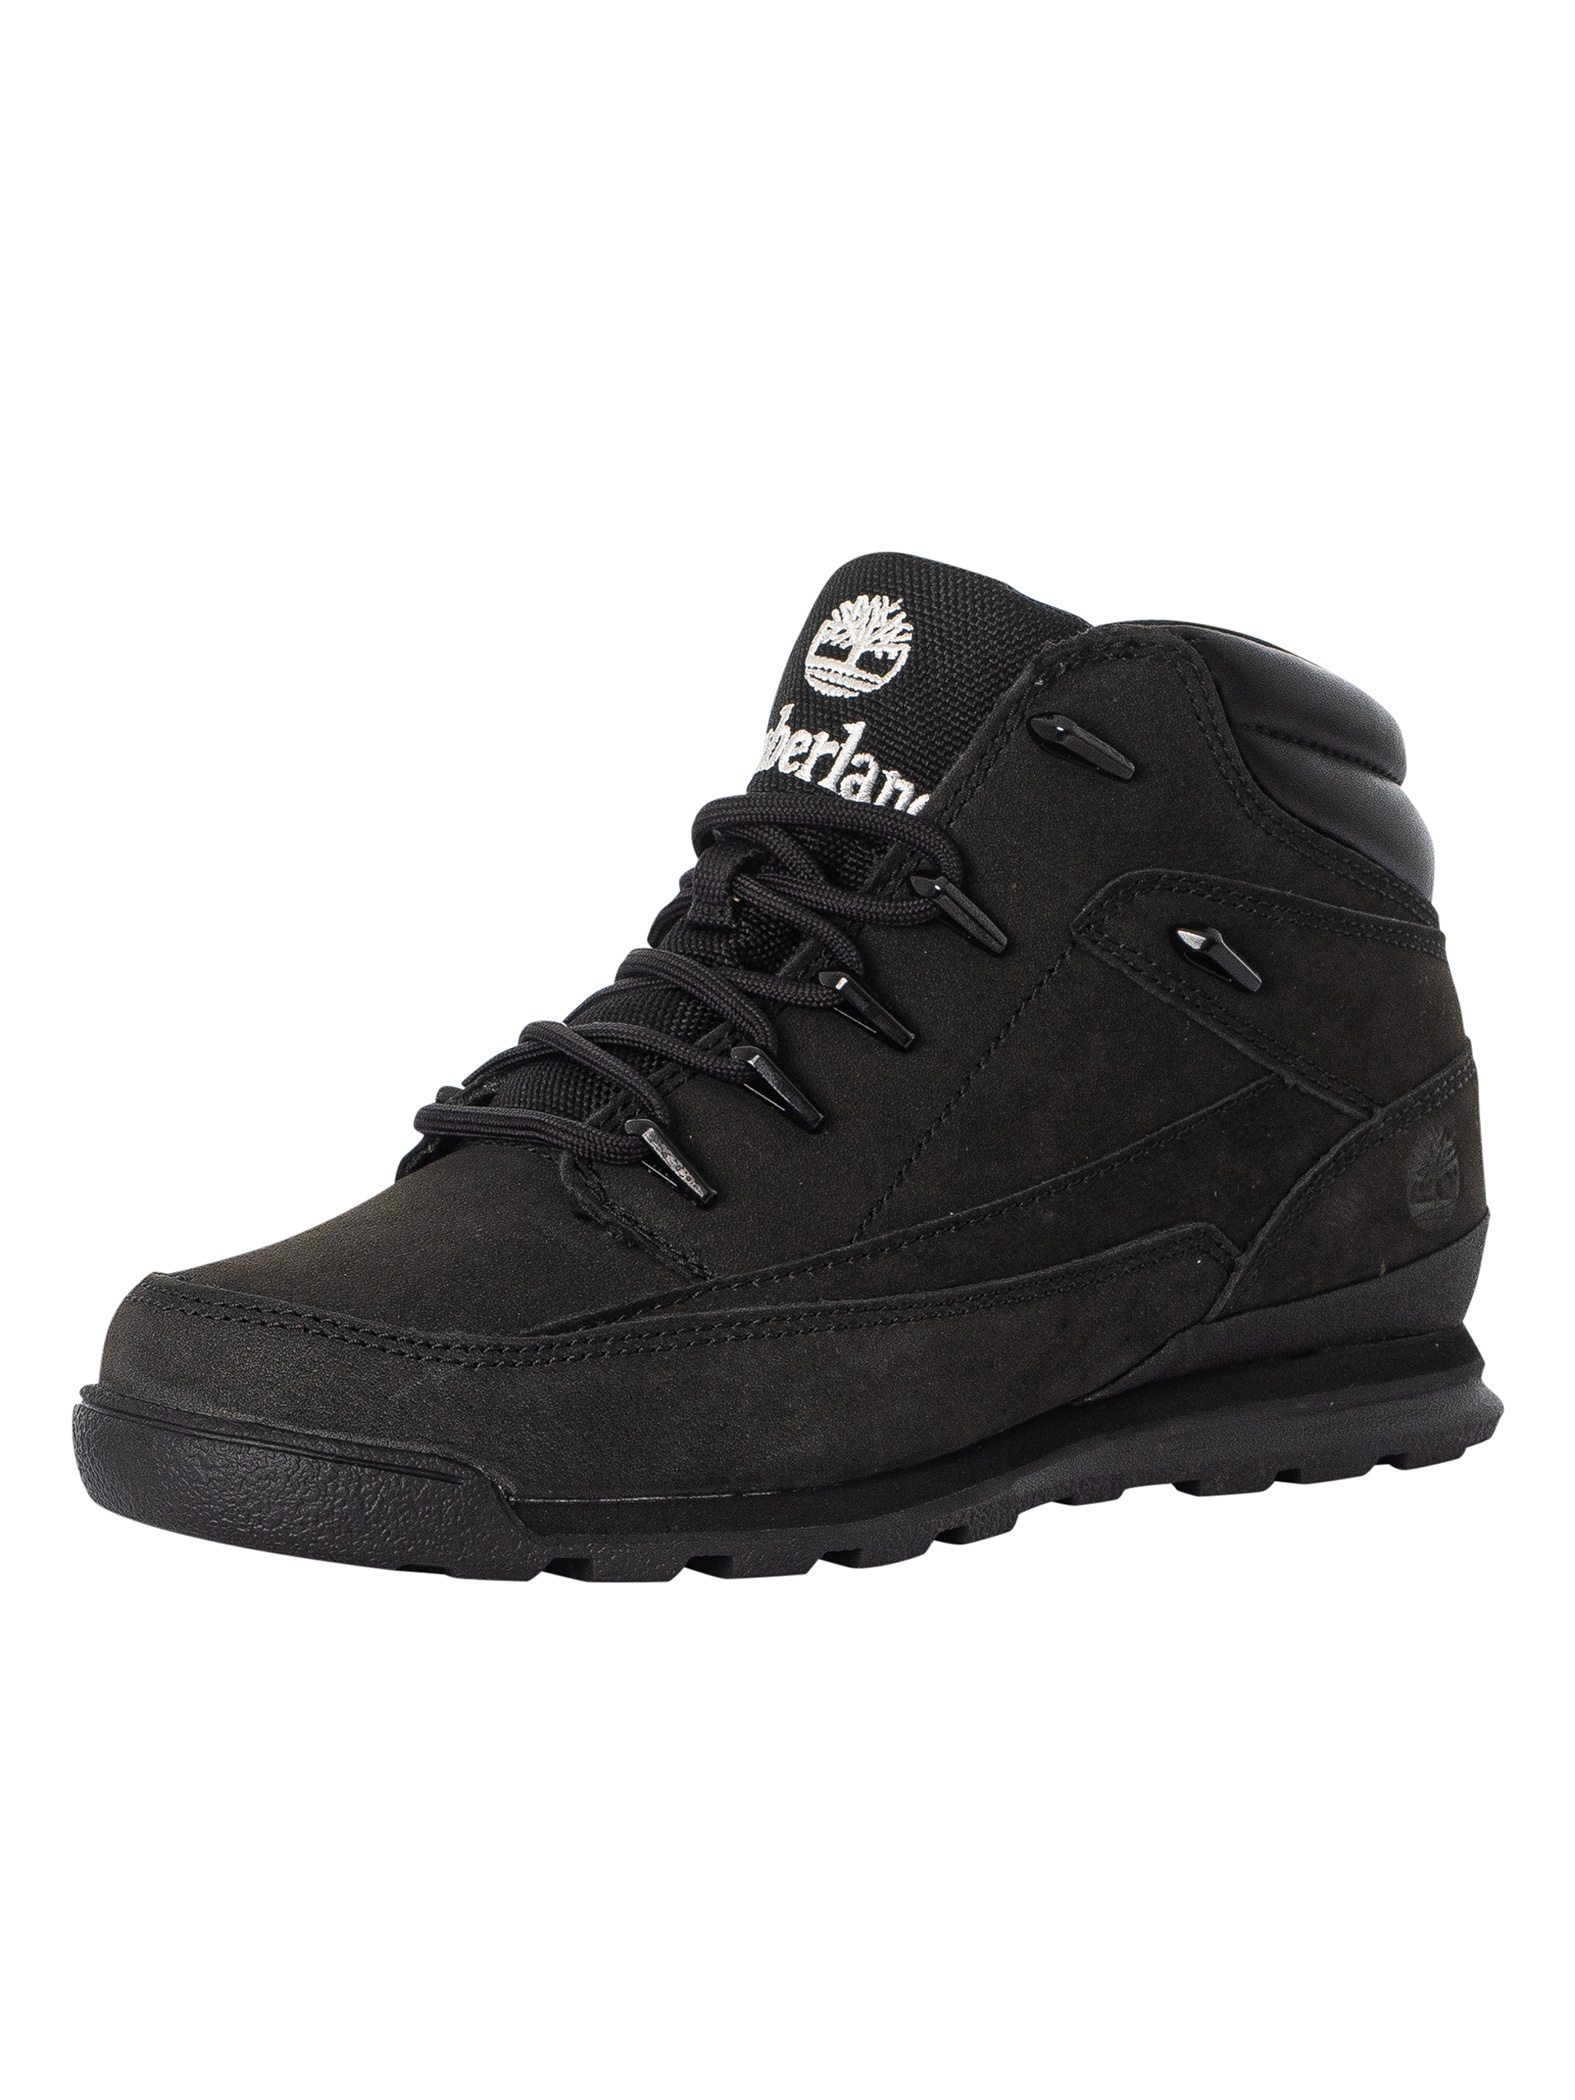 Euro Rock Mid Hiker Leather Boots product